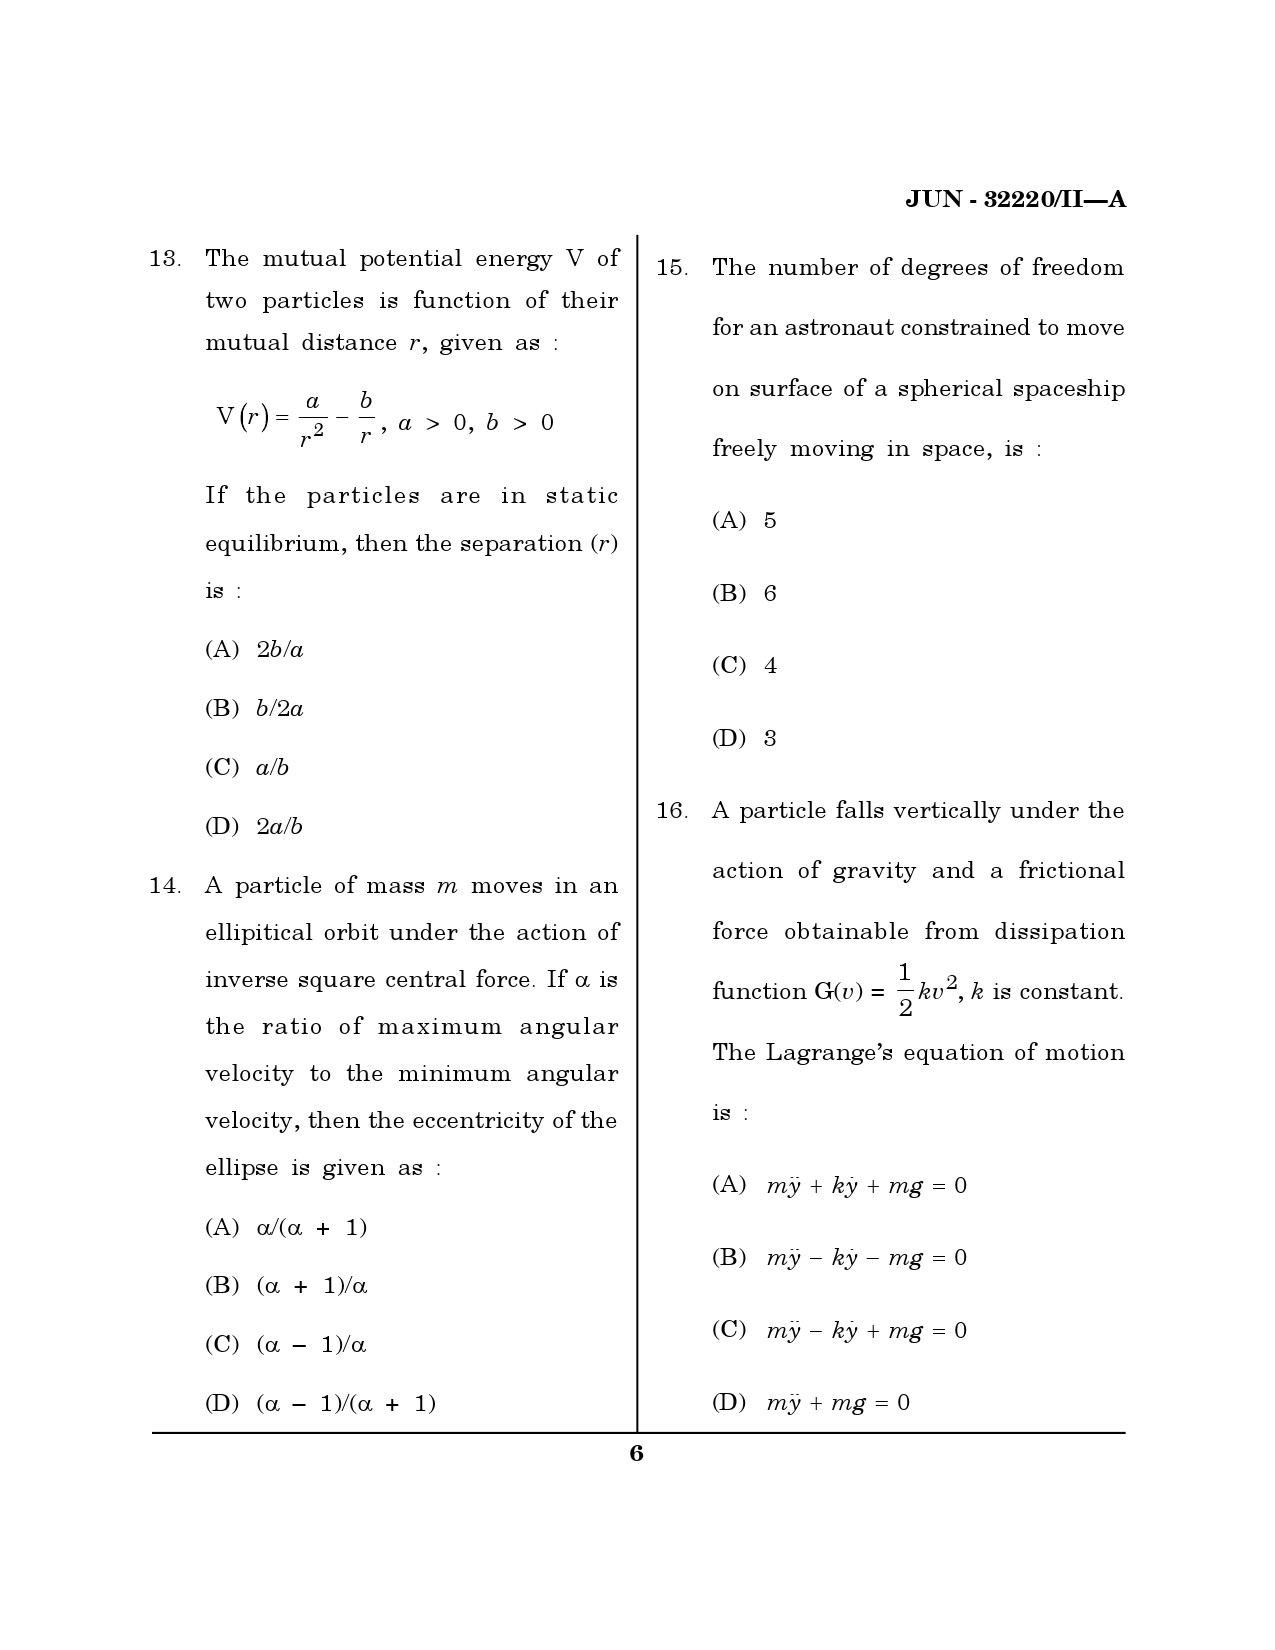 Maharashtra SET Physical Science Question Paper II June 2020 5